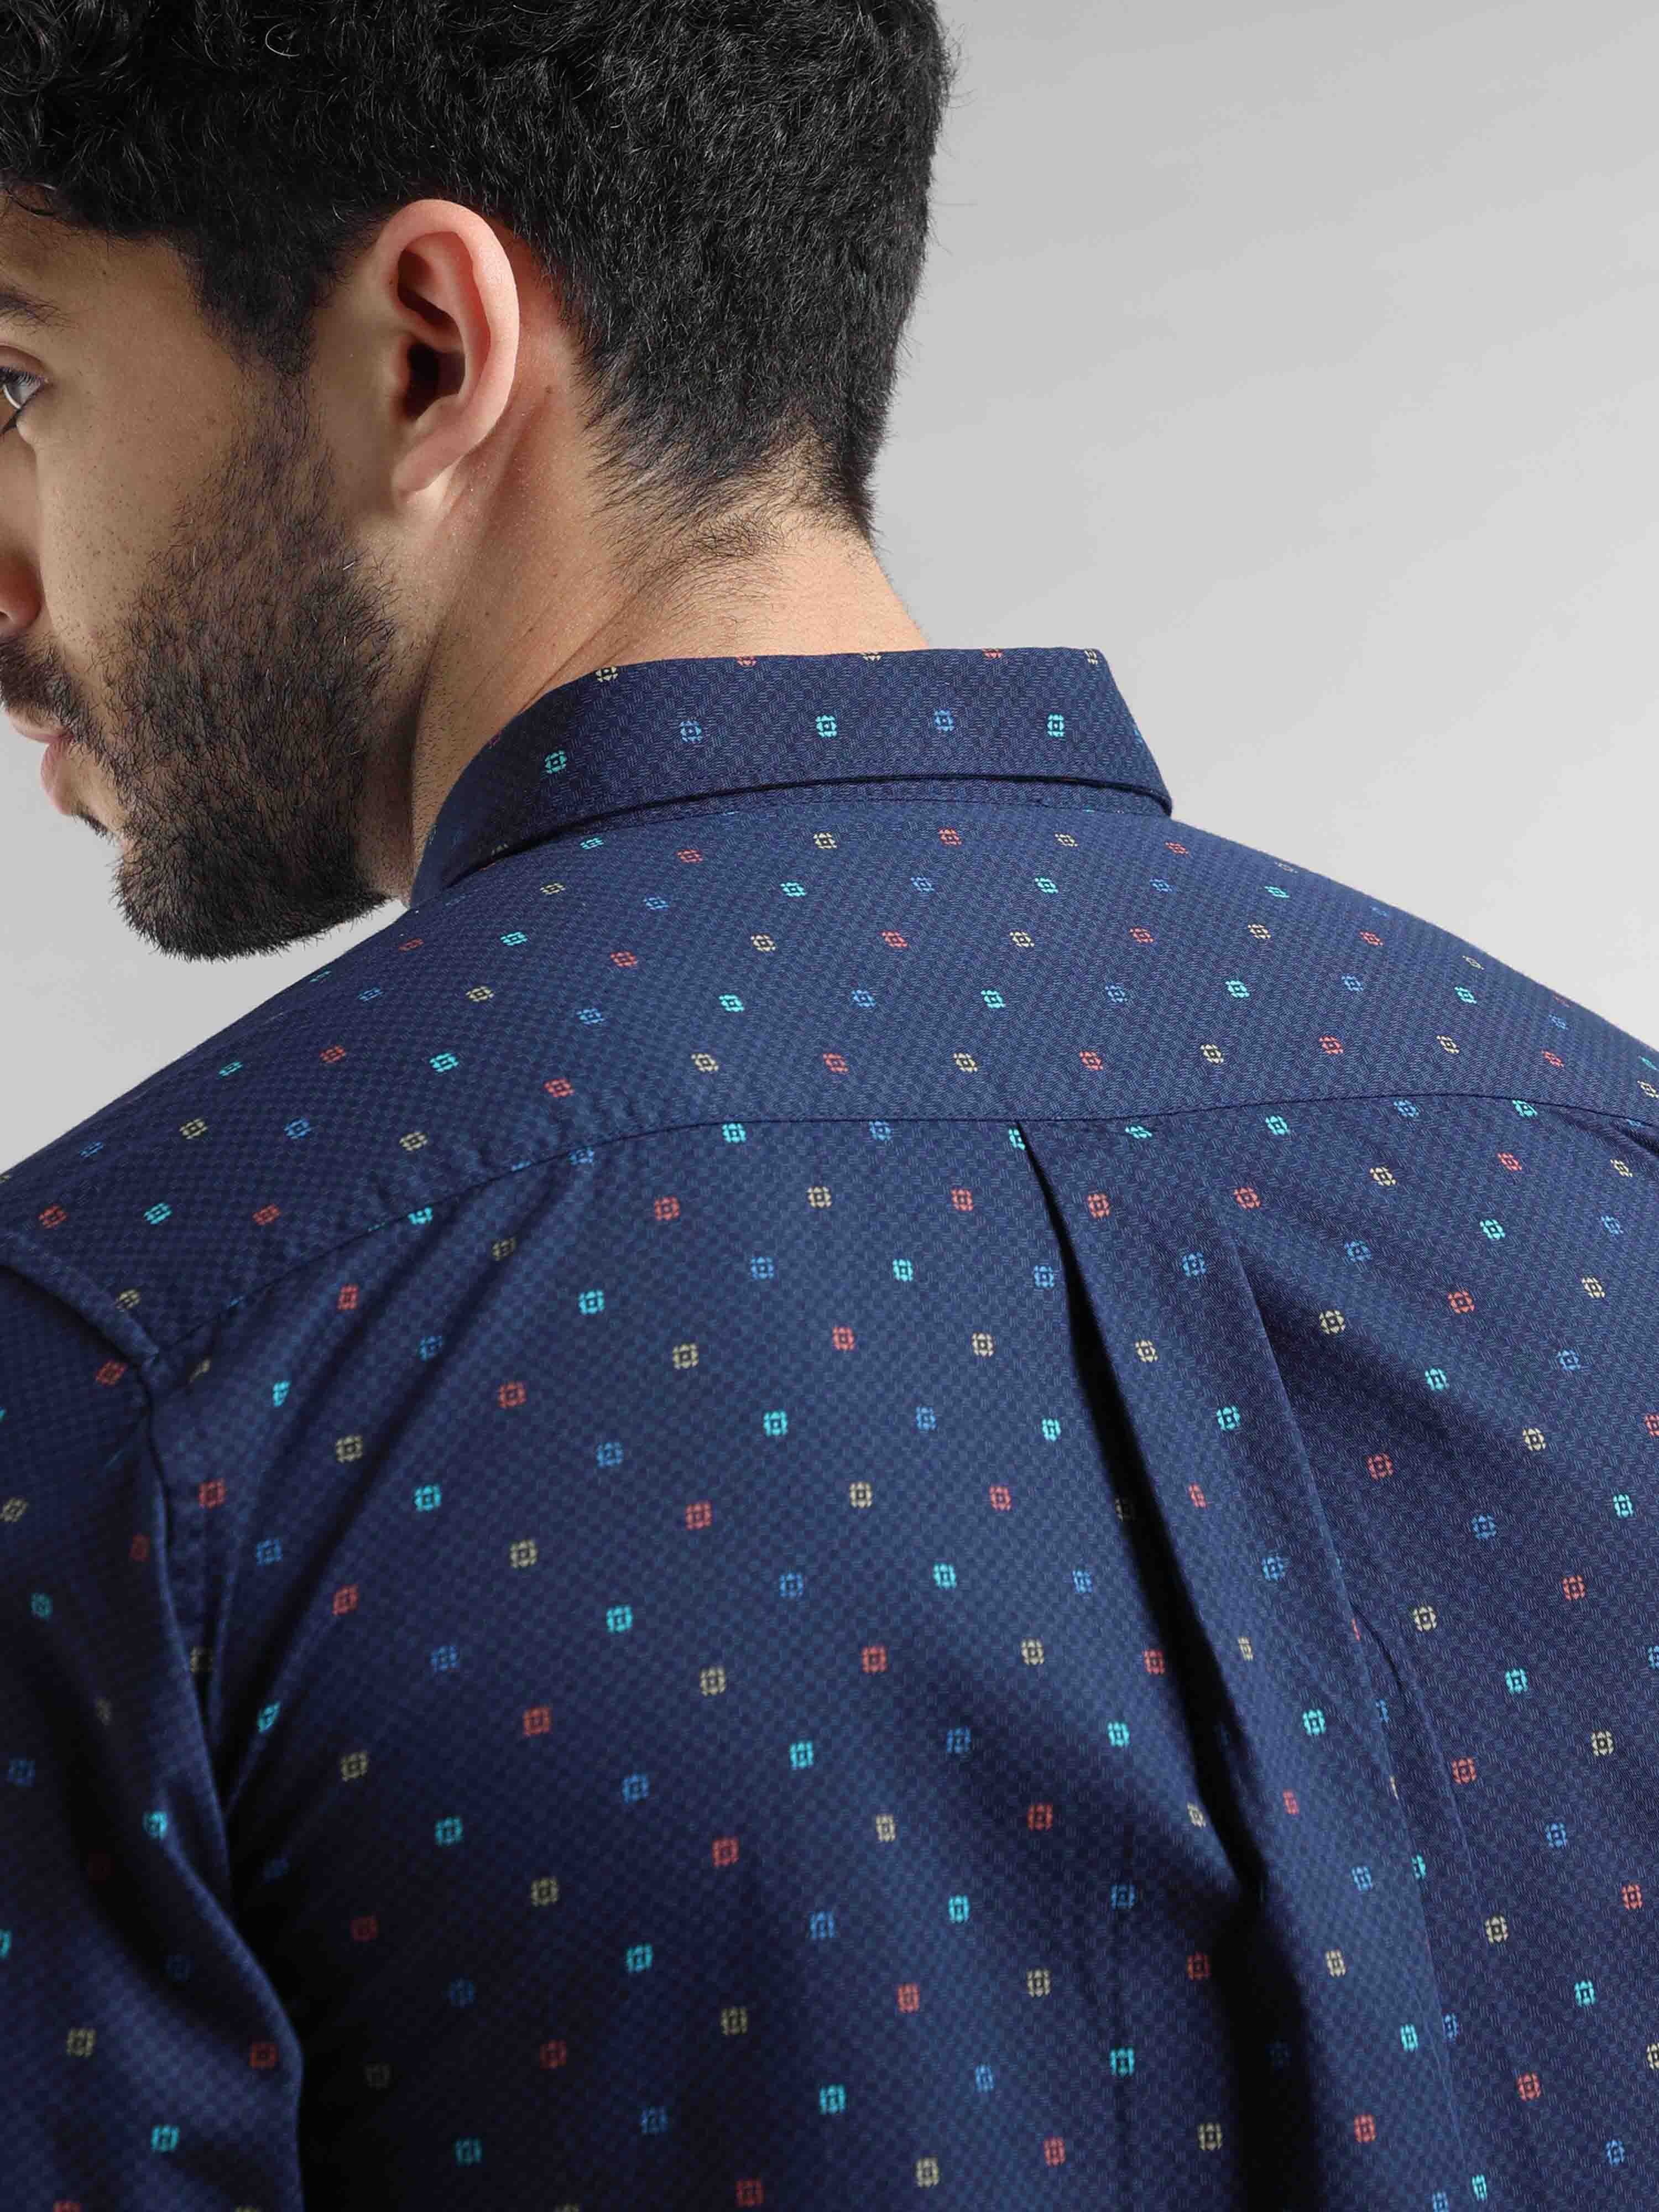 Shop Trendy Navy Blue Printed Shirt Online at Great PriceRs. 1299.00